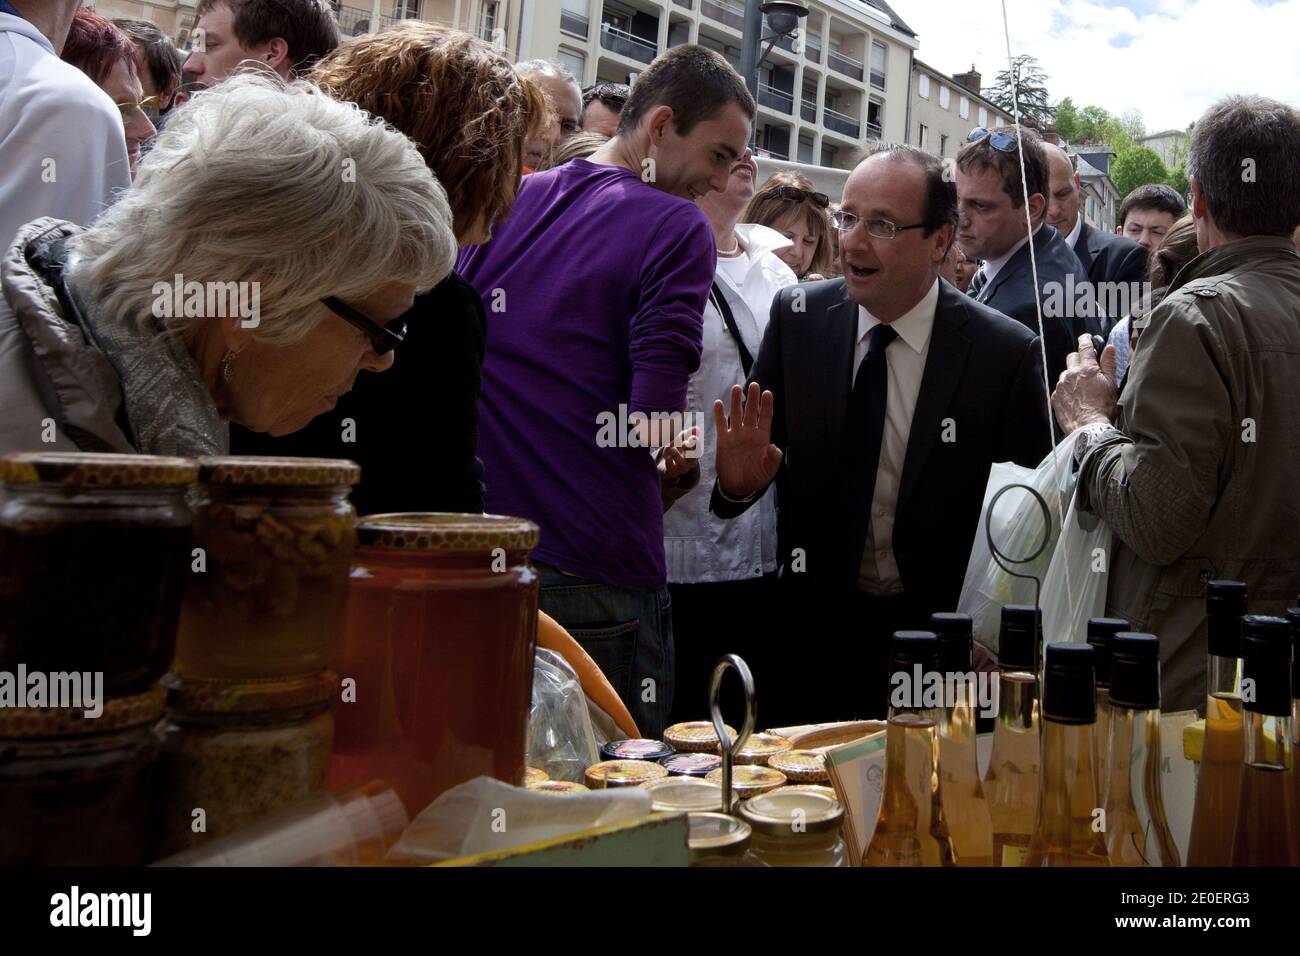 French Socialist Party (PS) President of the Correze Council General Assembly Francois Hollande visits a market in Tulle, France, on may 05, 2012. Photo by Stephane Lemouton/ABACAPRESS.COM. Stock Photo